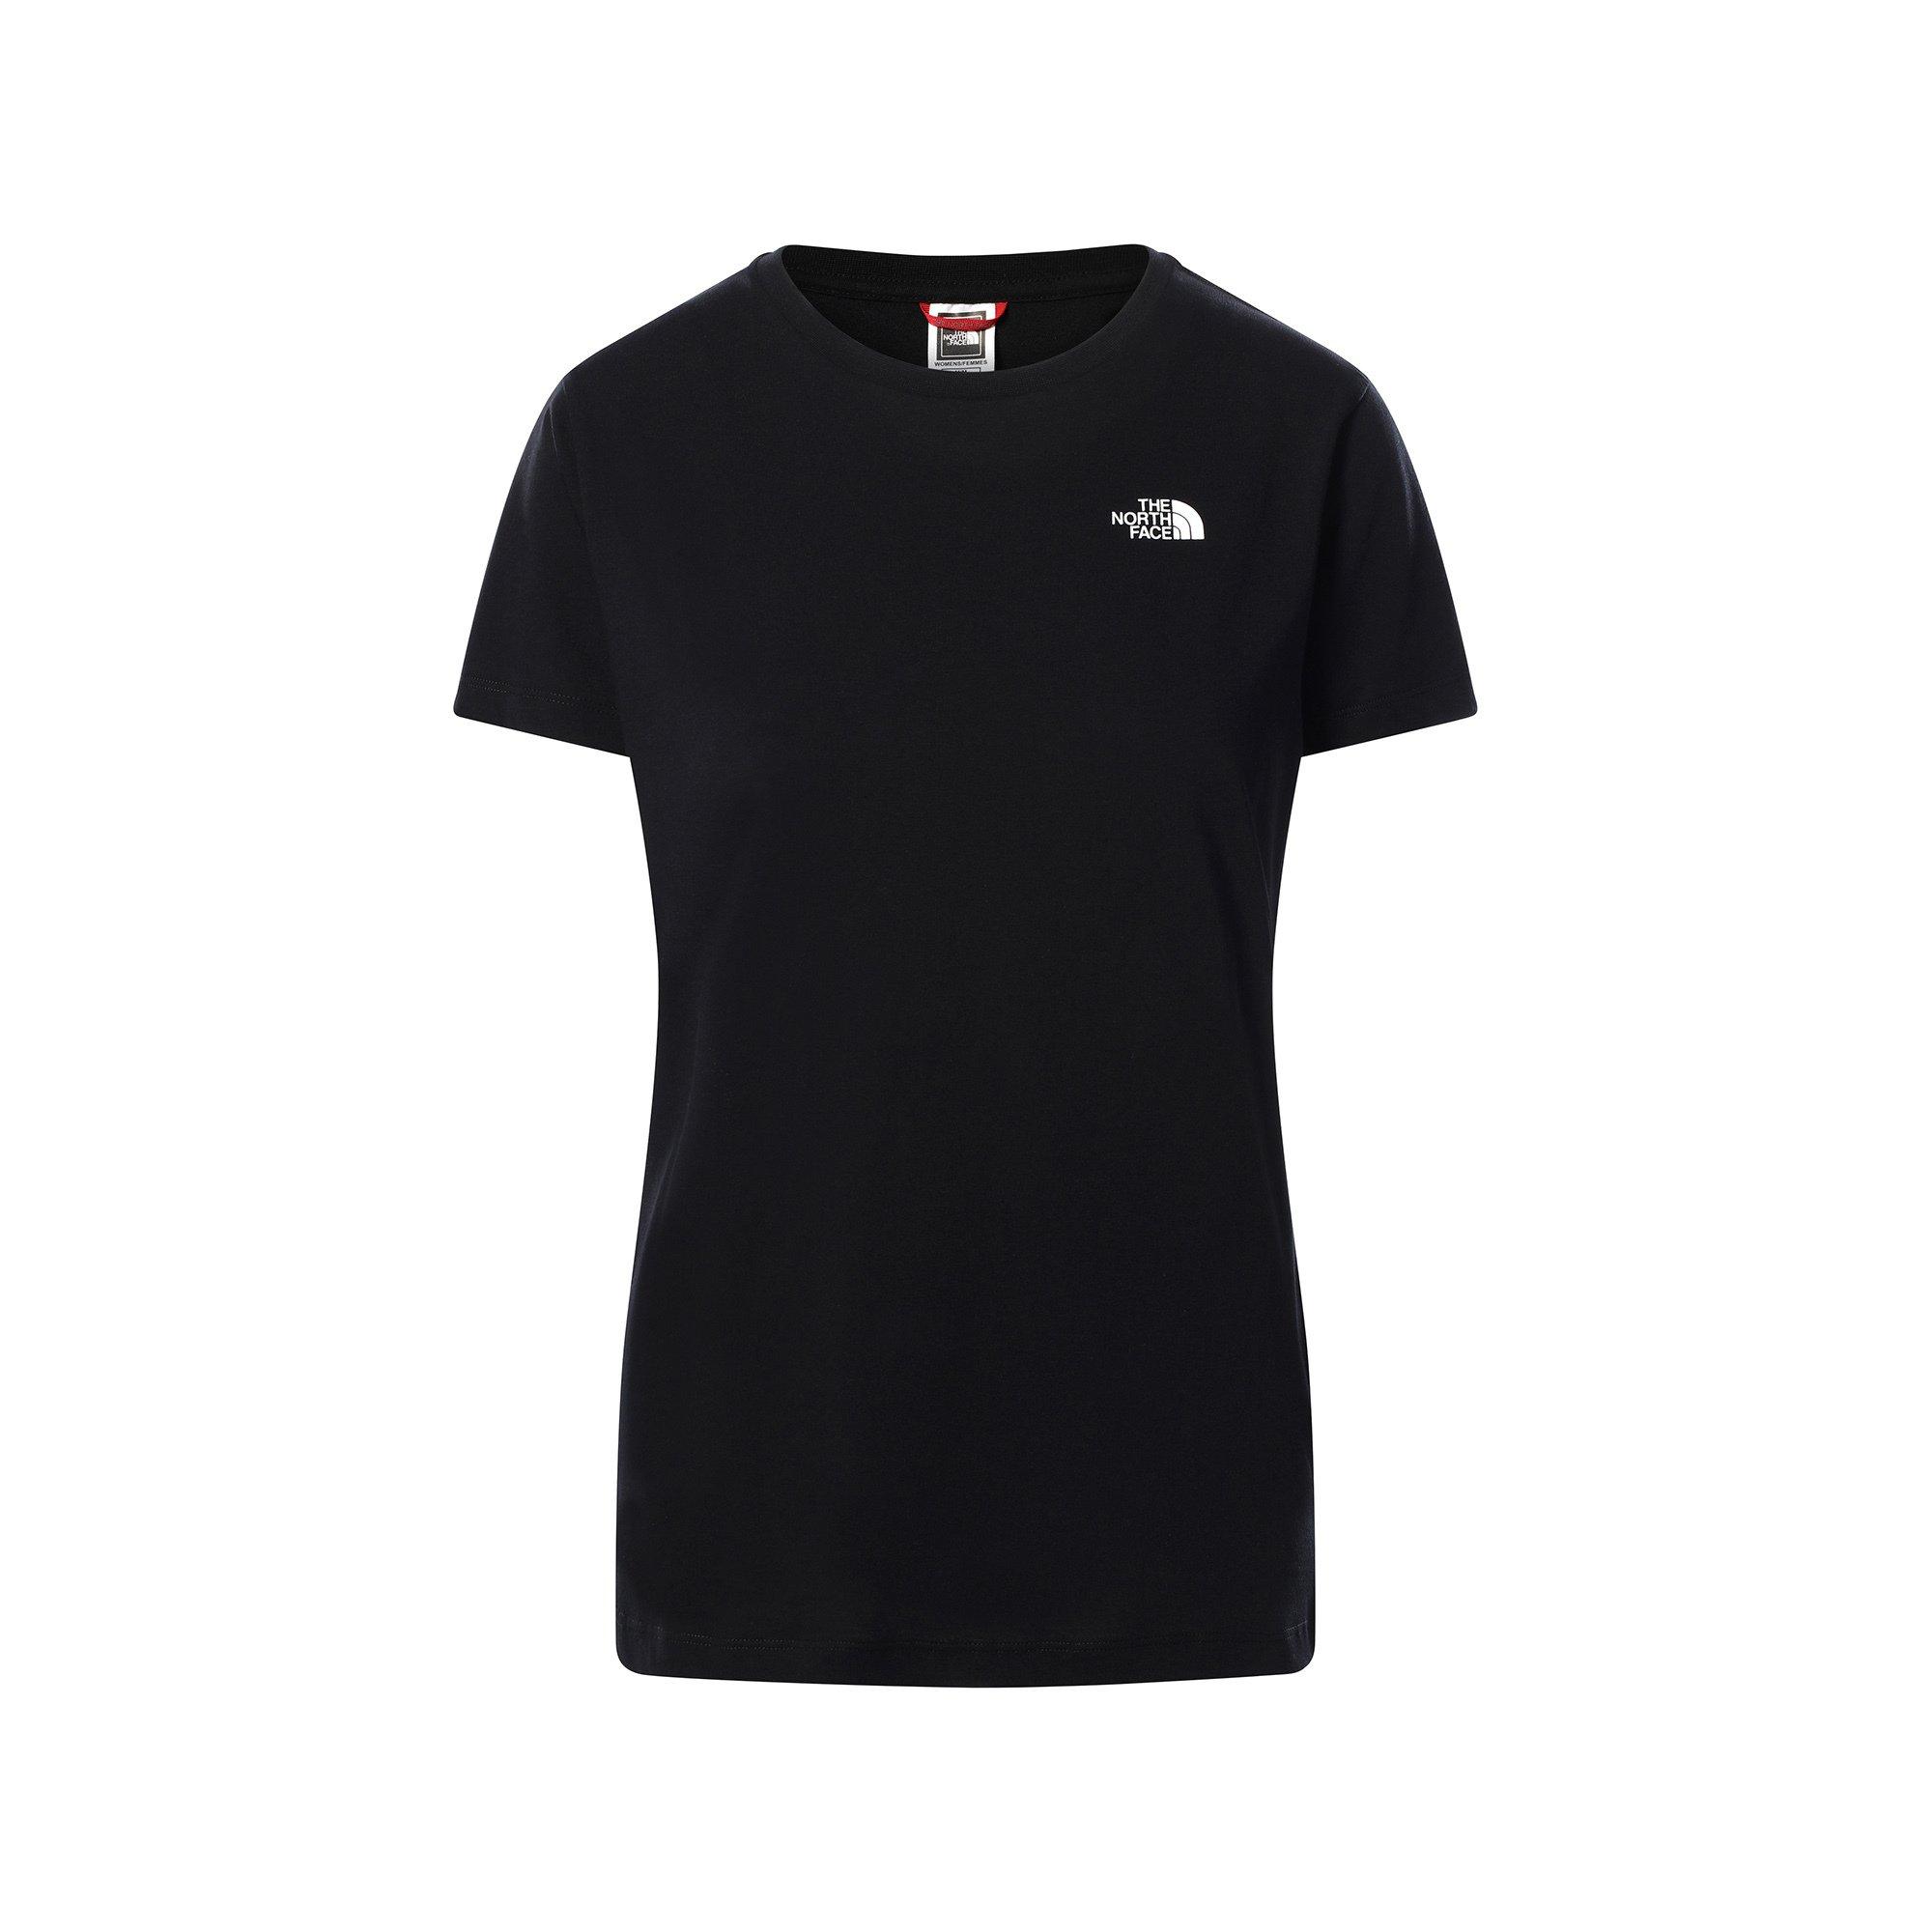 THE NORTH FACE S/S Simple Dome Tee T-shirt 